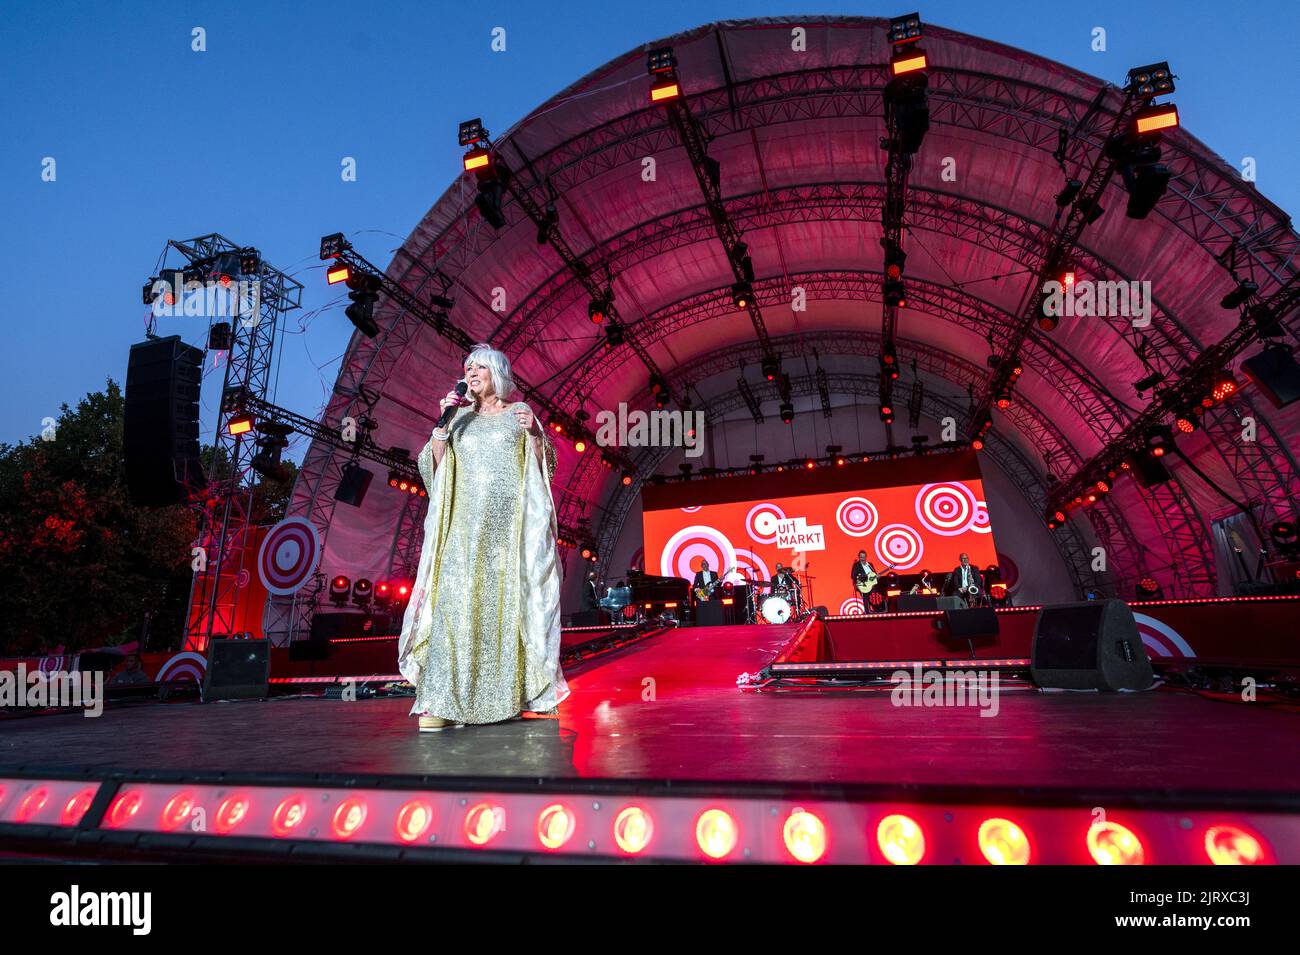 Amsterdam, Netherlands. 26th Aug, 2022. 2022-08-26 20:56:25 AMSTERDAM - Willeke Alberti during her performance on the occasion of the kick-off of the Uitmarkt on the Museumplein. This opens the cultural season. ANP EVERT ELZINGA netherlands out - belgium out Credit: ANP/Alamy Live News Stock Photo